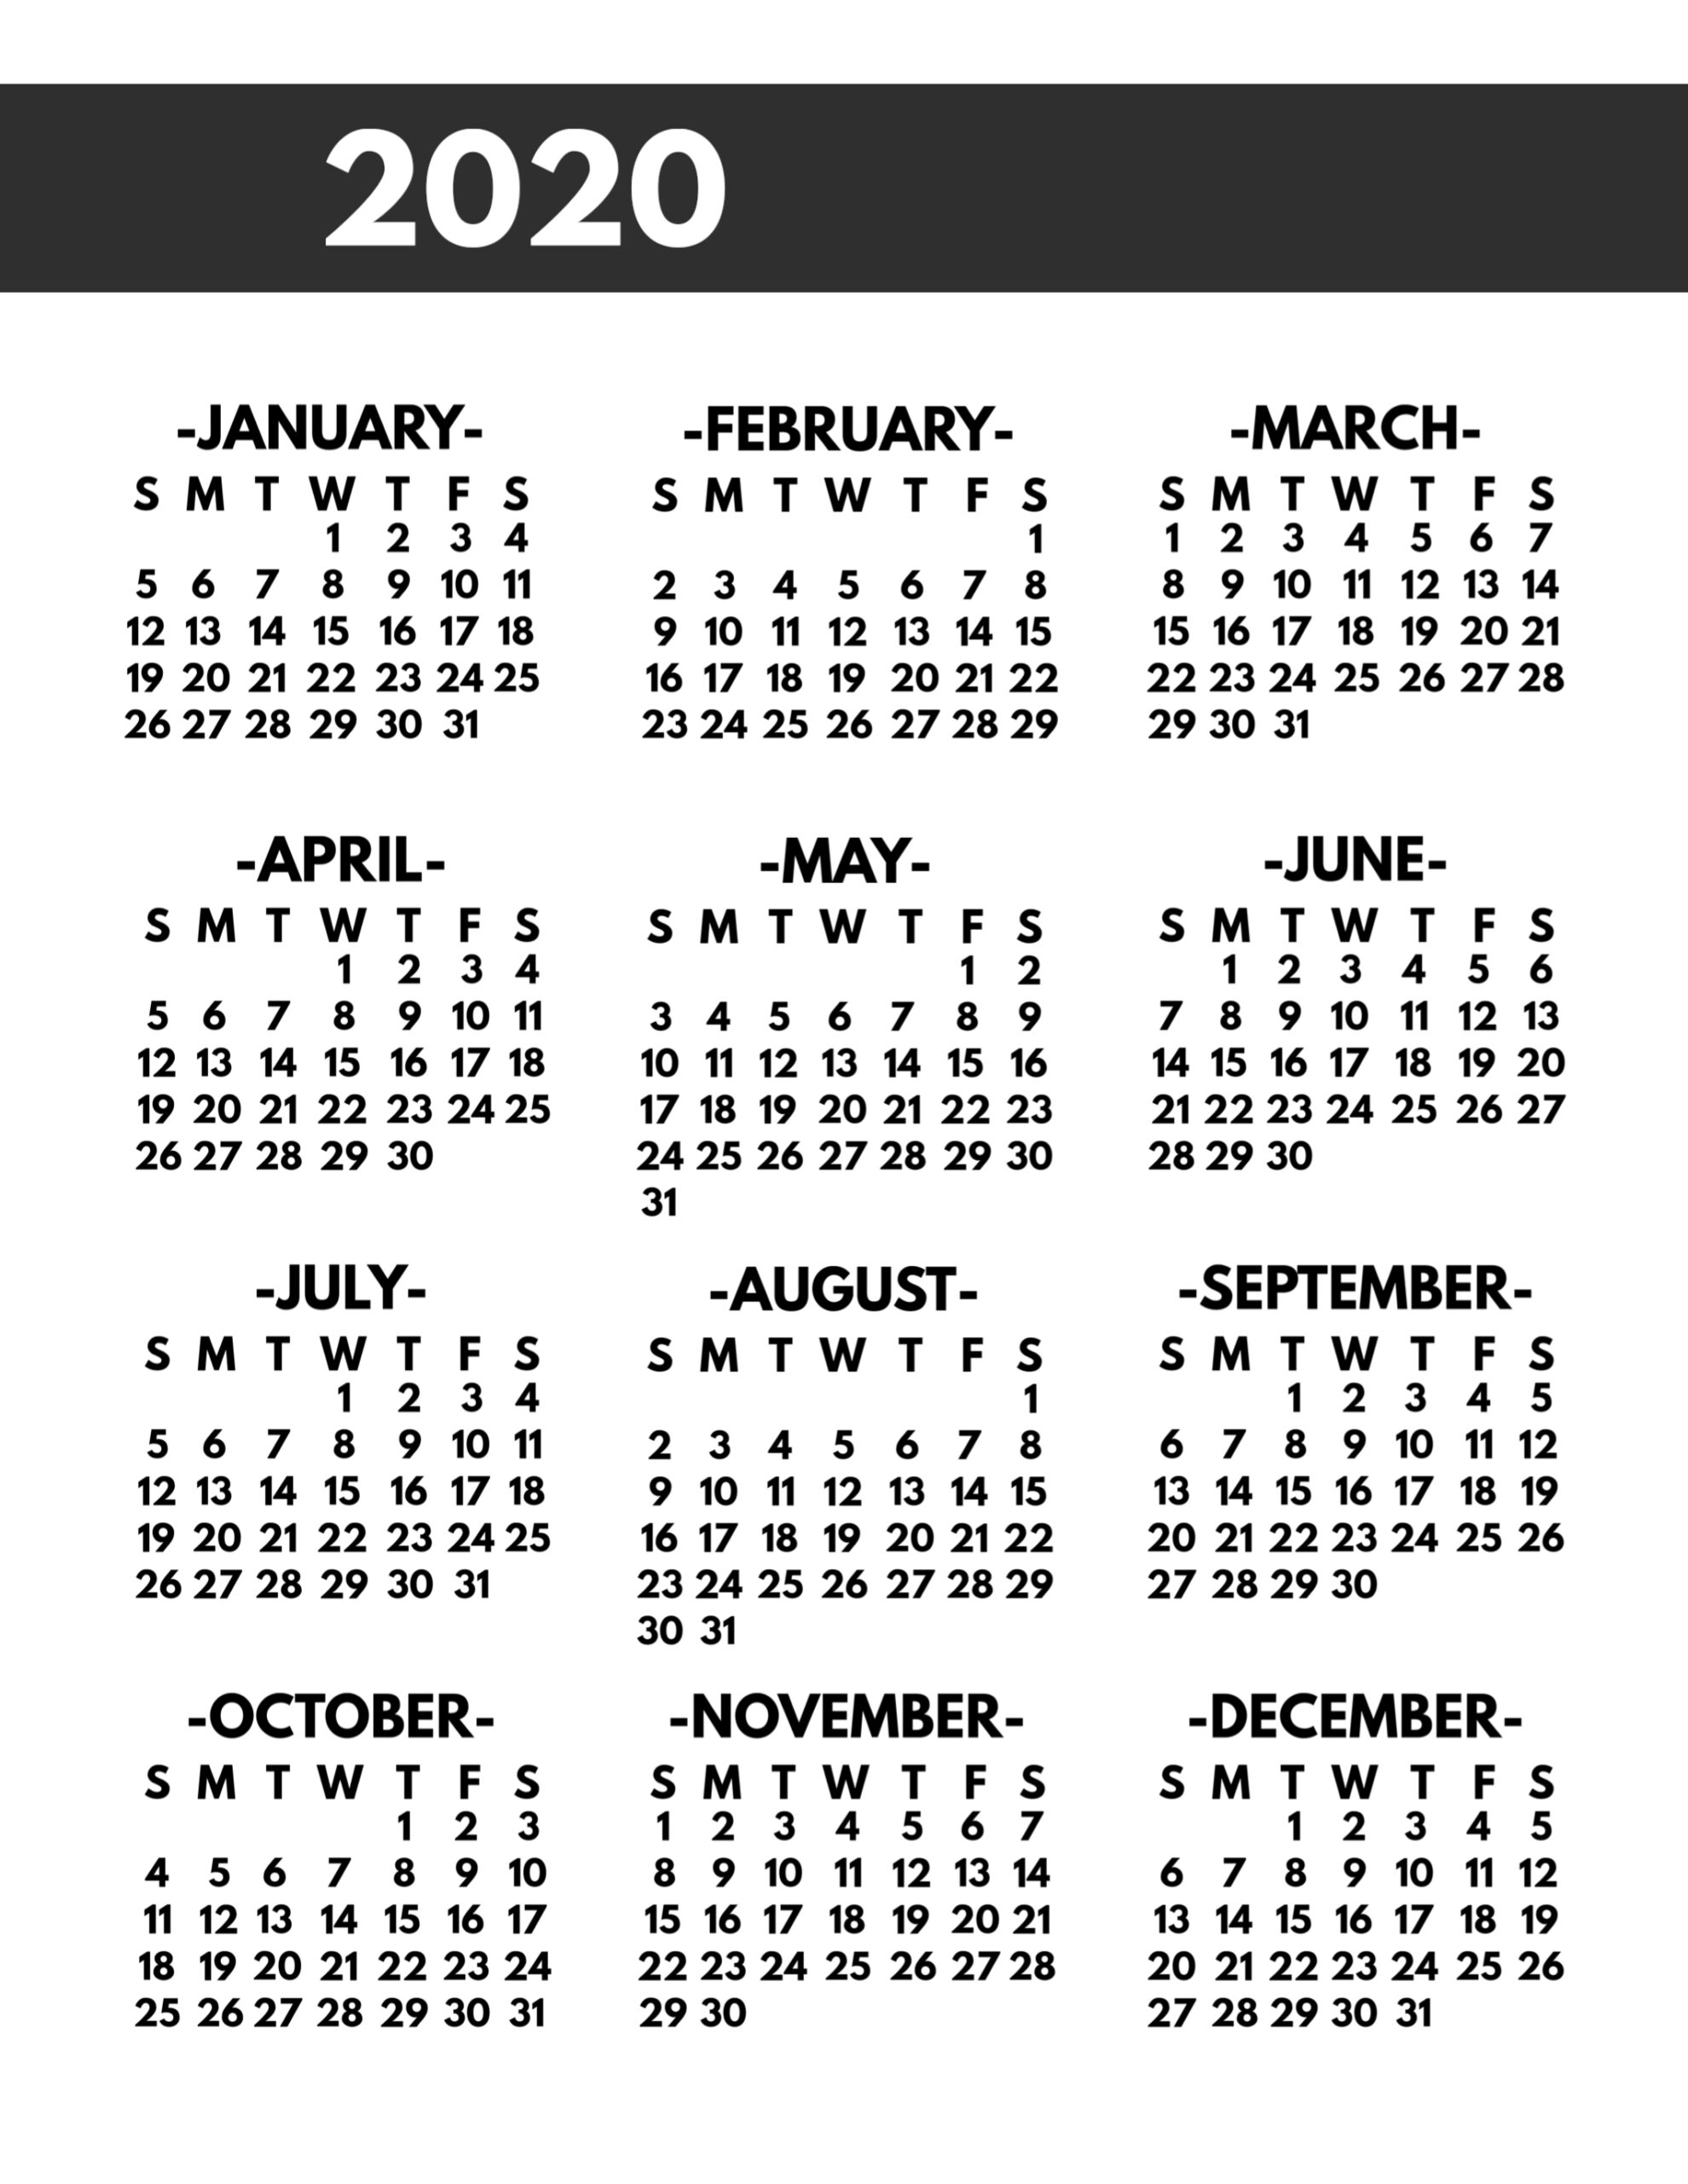 2020 Printable One Page Year At A Glance Calendar - Paper intended for Printable 2020 Calendar Year At A Glance